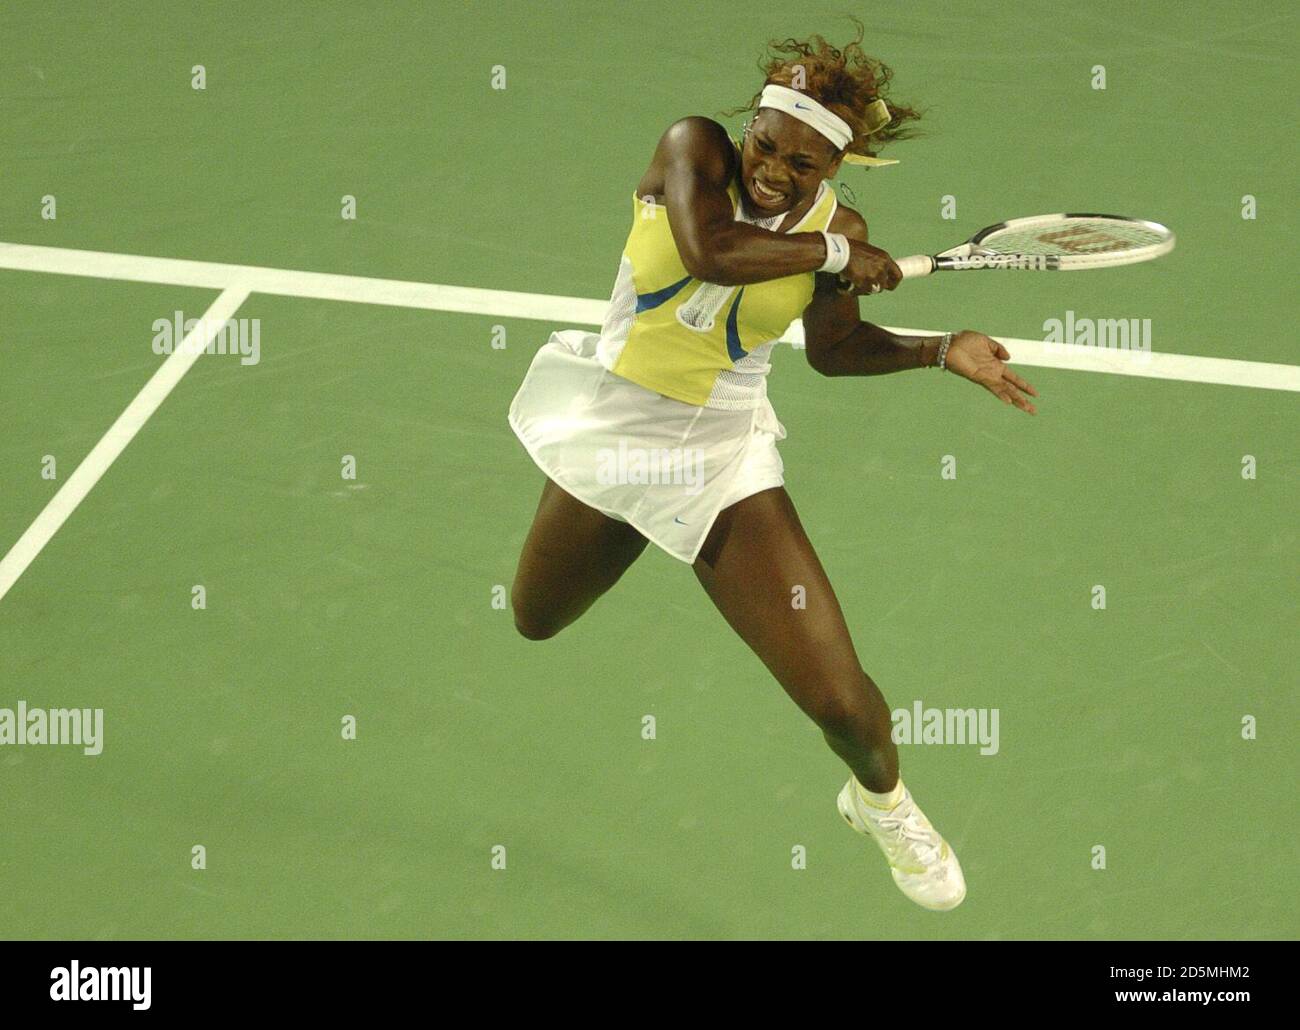 Serena Williams in action during her match against Lindsay Davenport Stock Photo